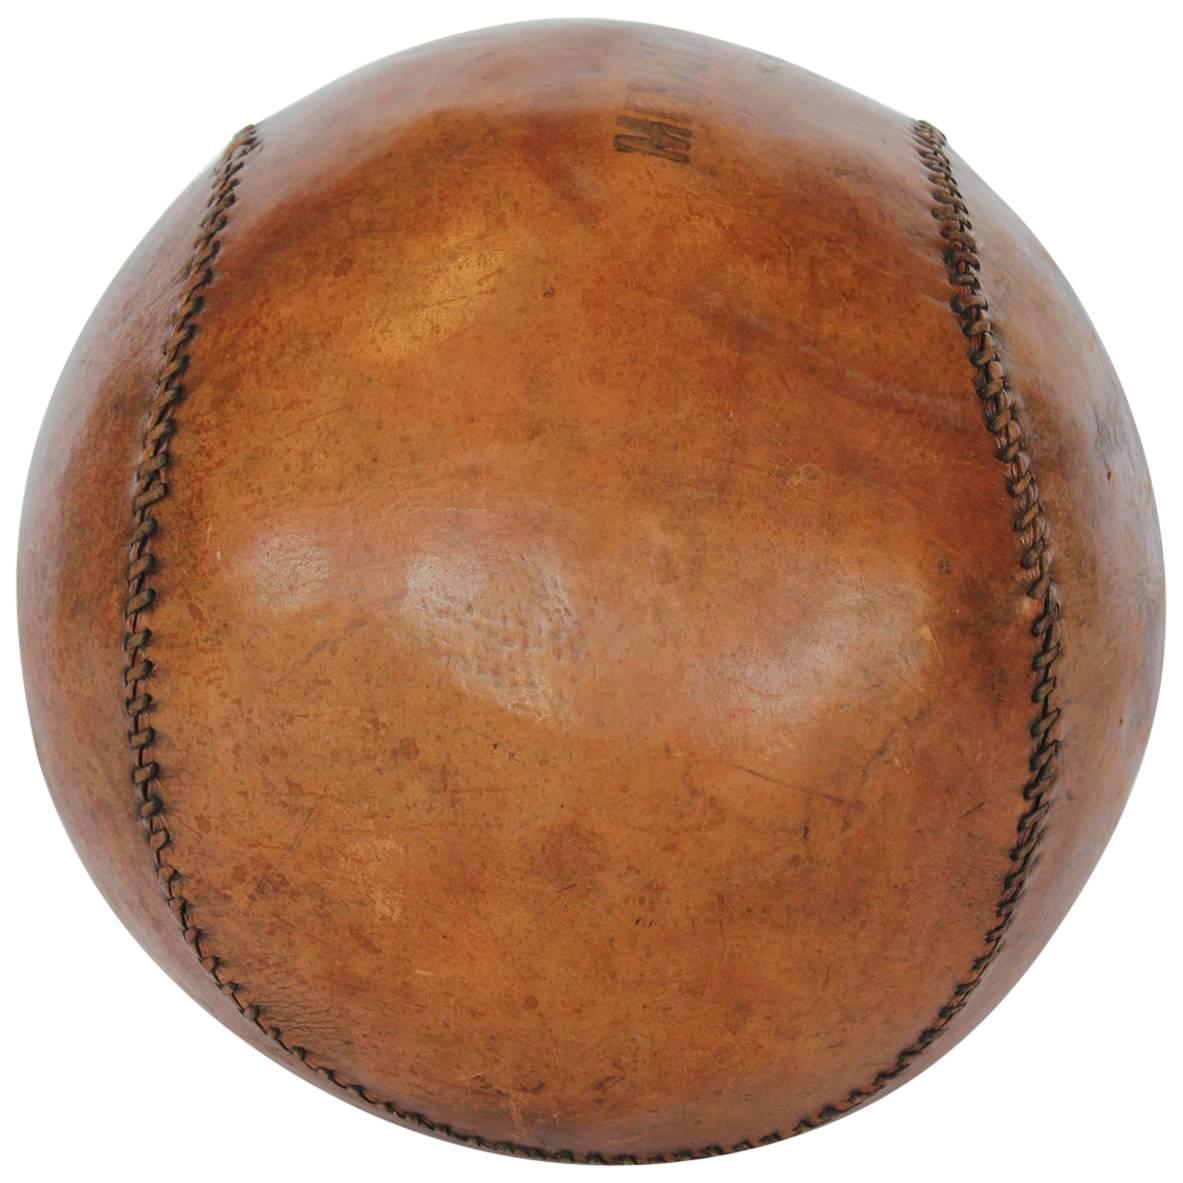 Oversized 1950s Hand-Stitched Leather Baseball For Sale